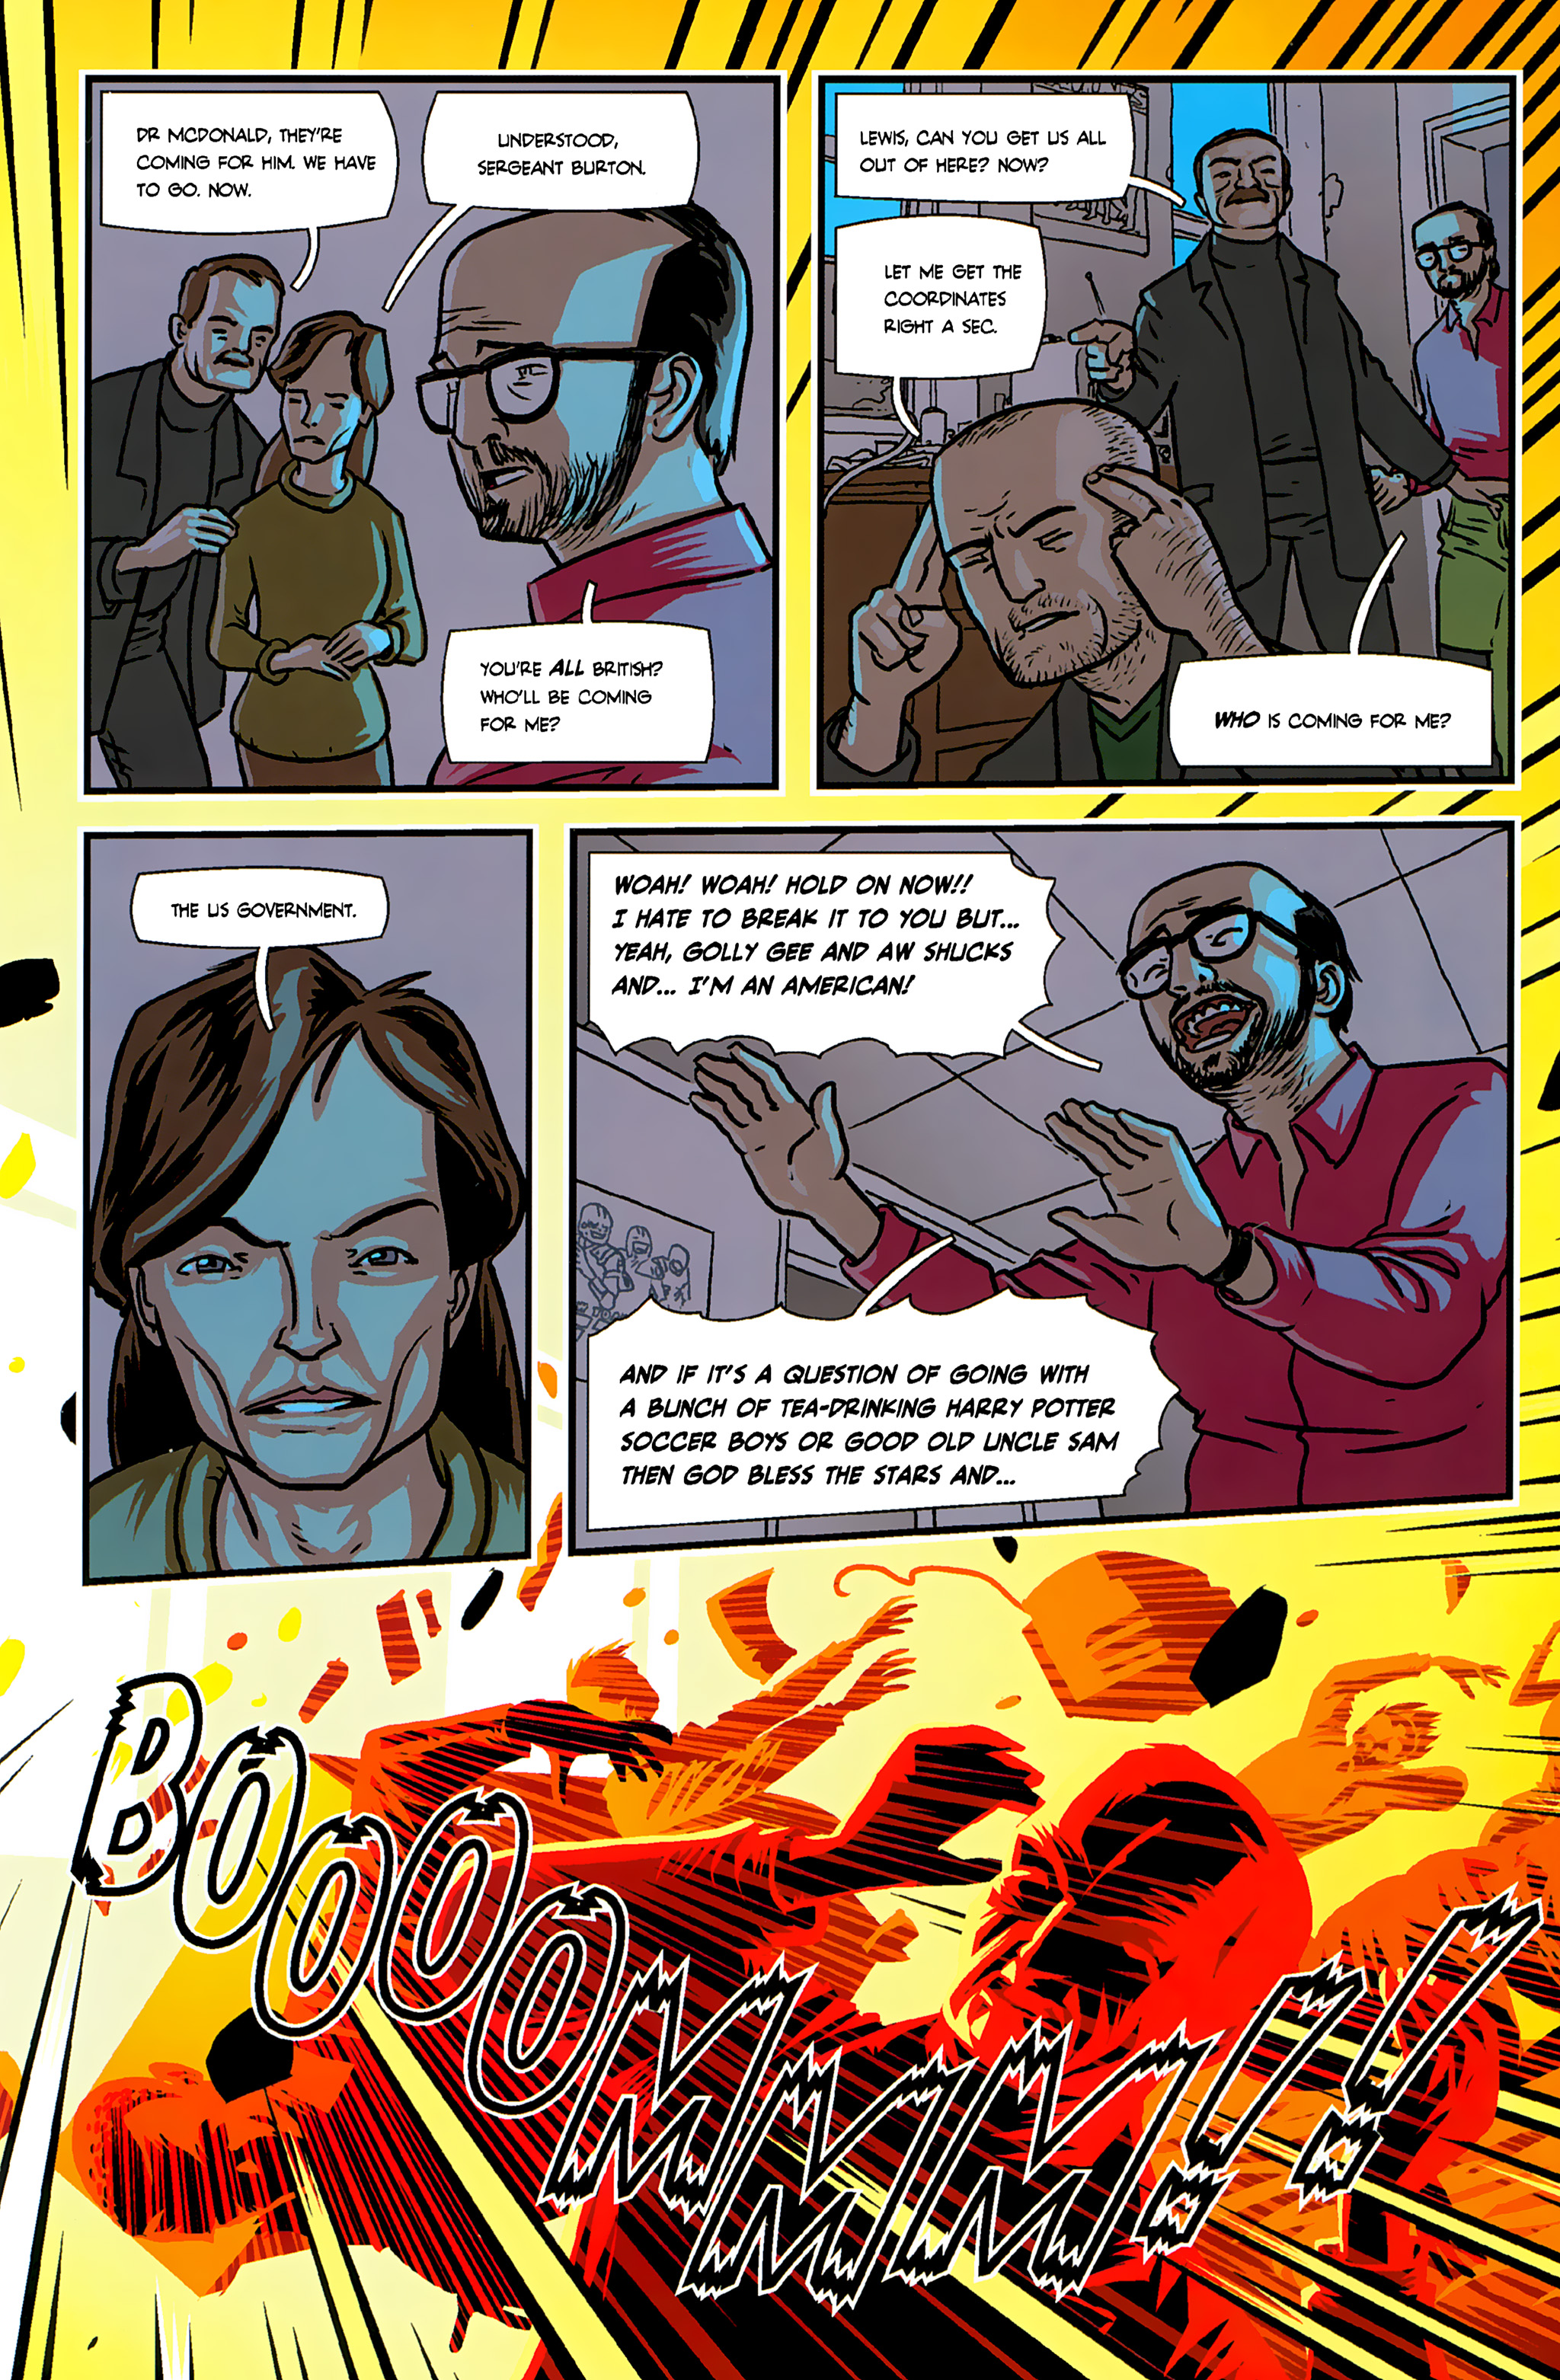 Read online Ordinary comic -  Issue #3 - 13